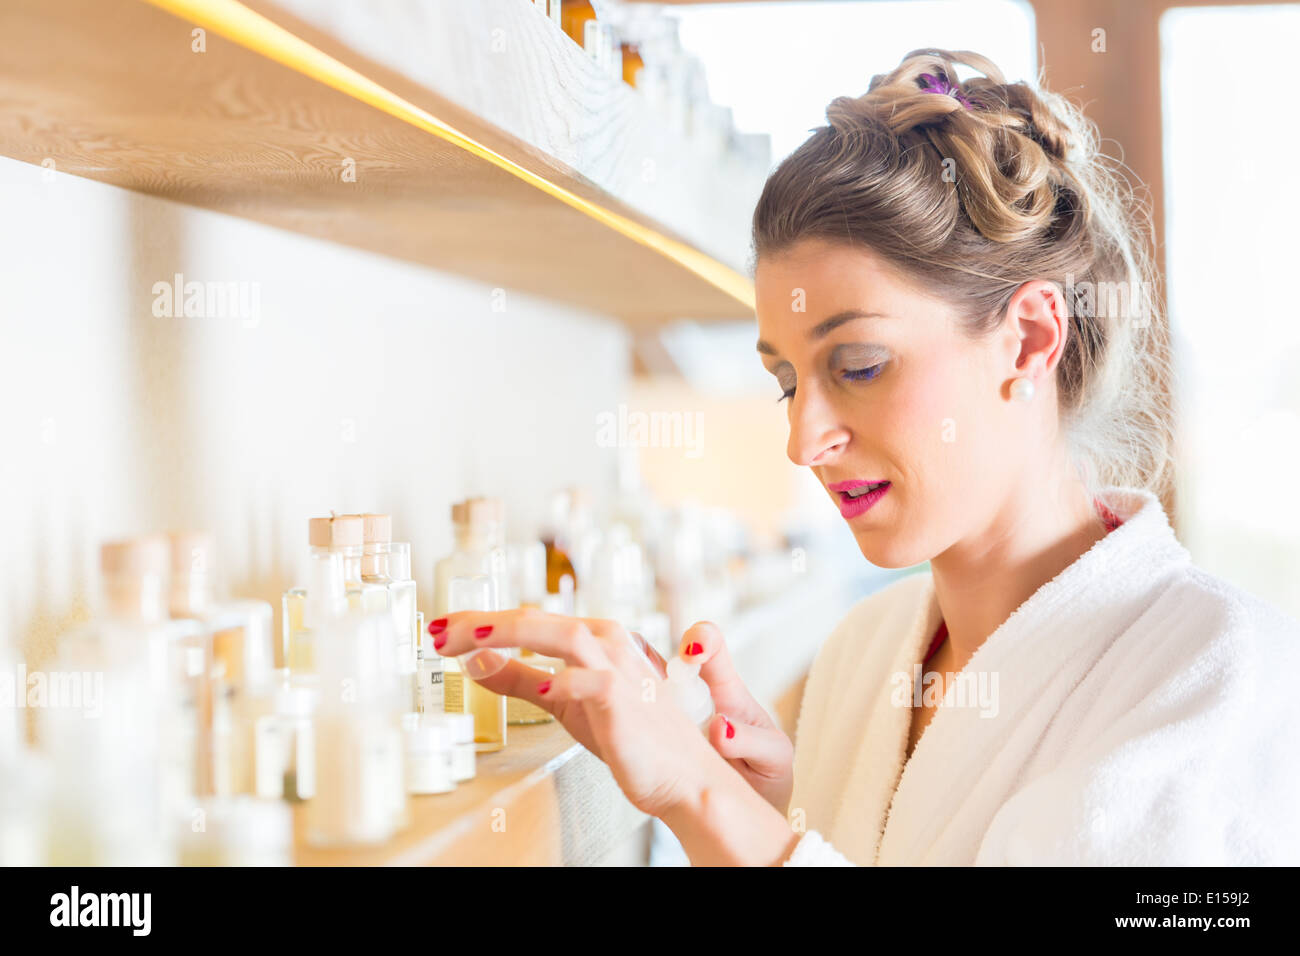 Woman in bath robe choosing face care products in wellness spa Stock Photo